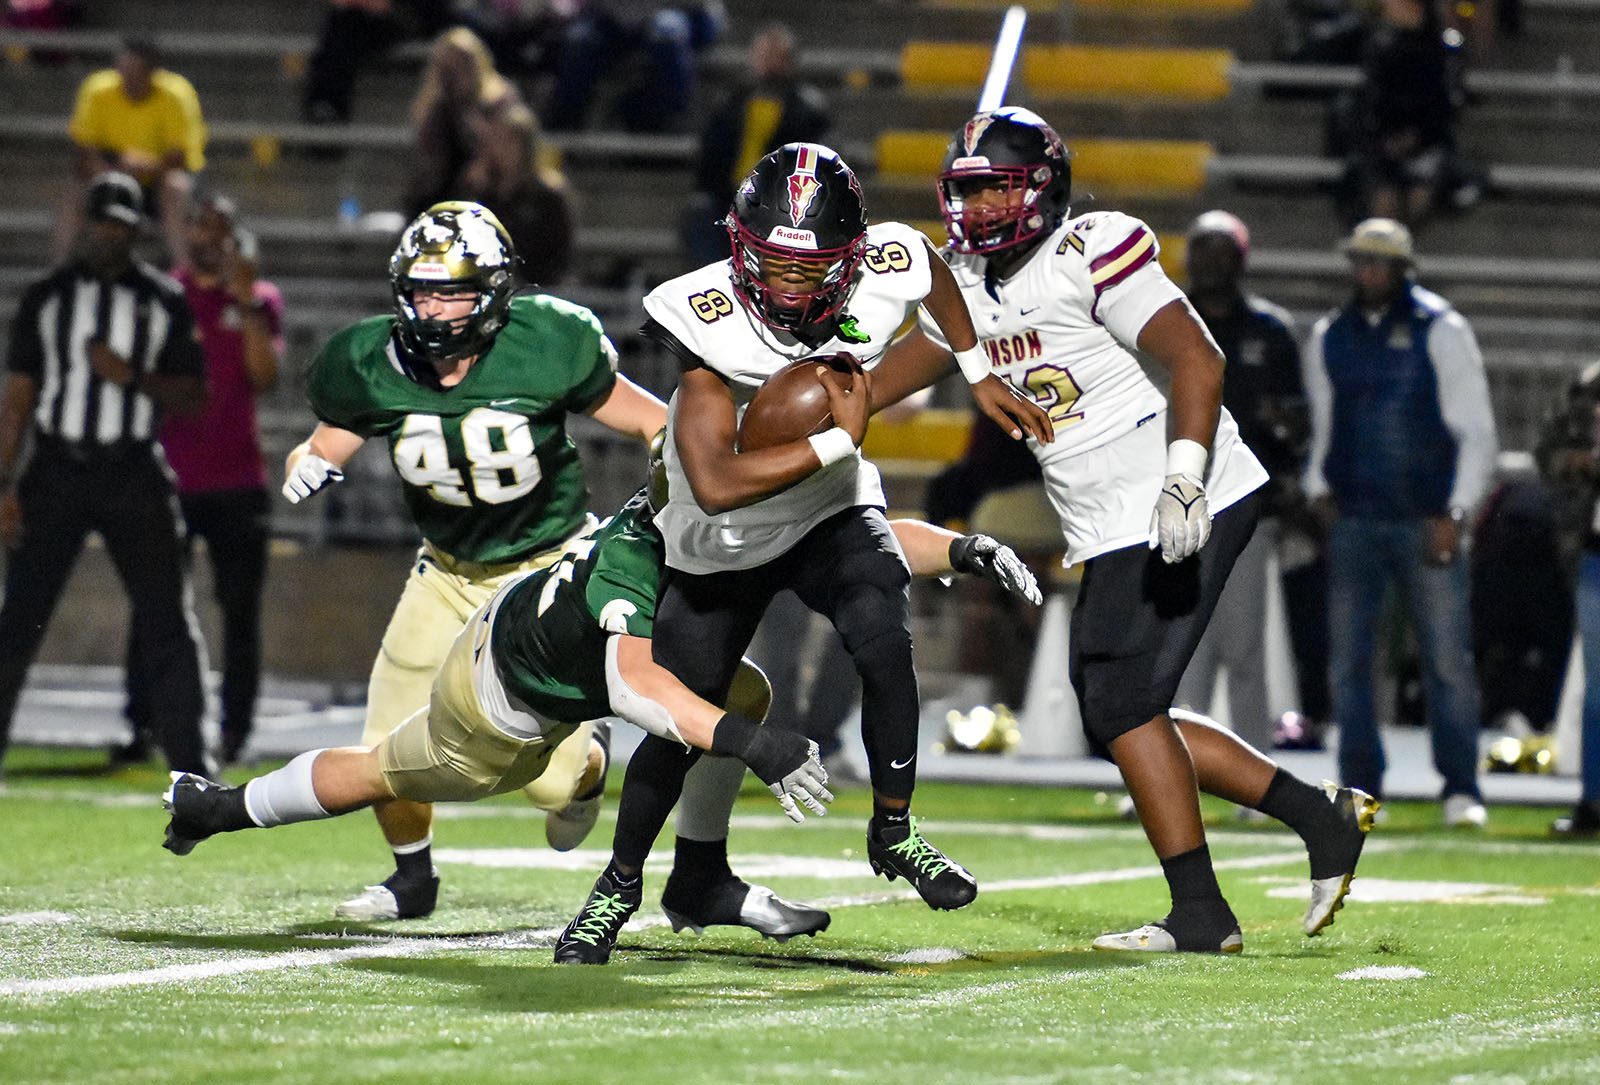 Pinson Valley falls to Mountain Brook, 49-7